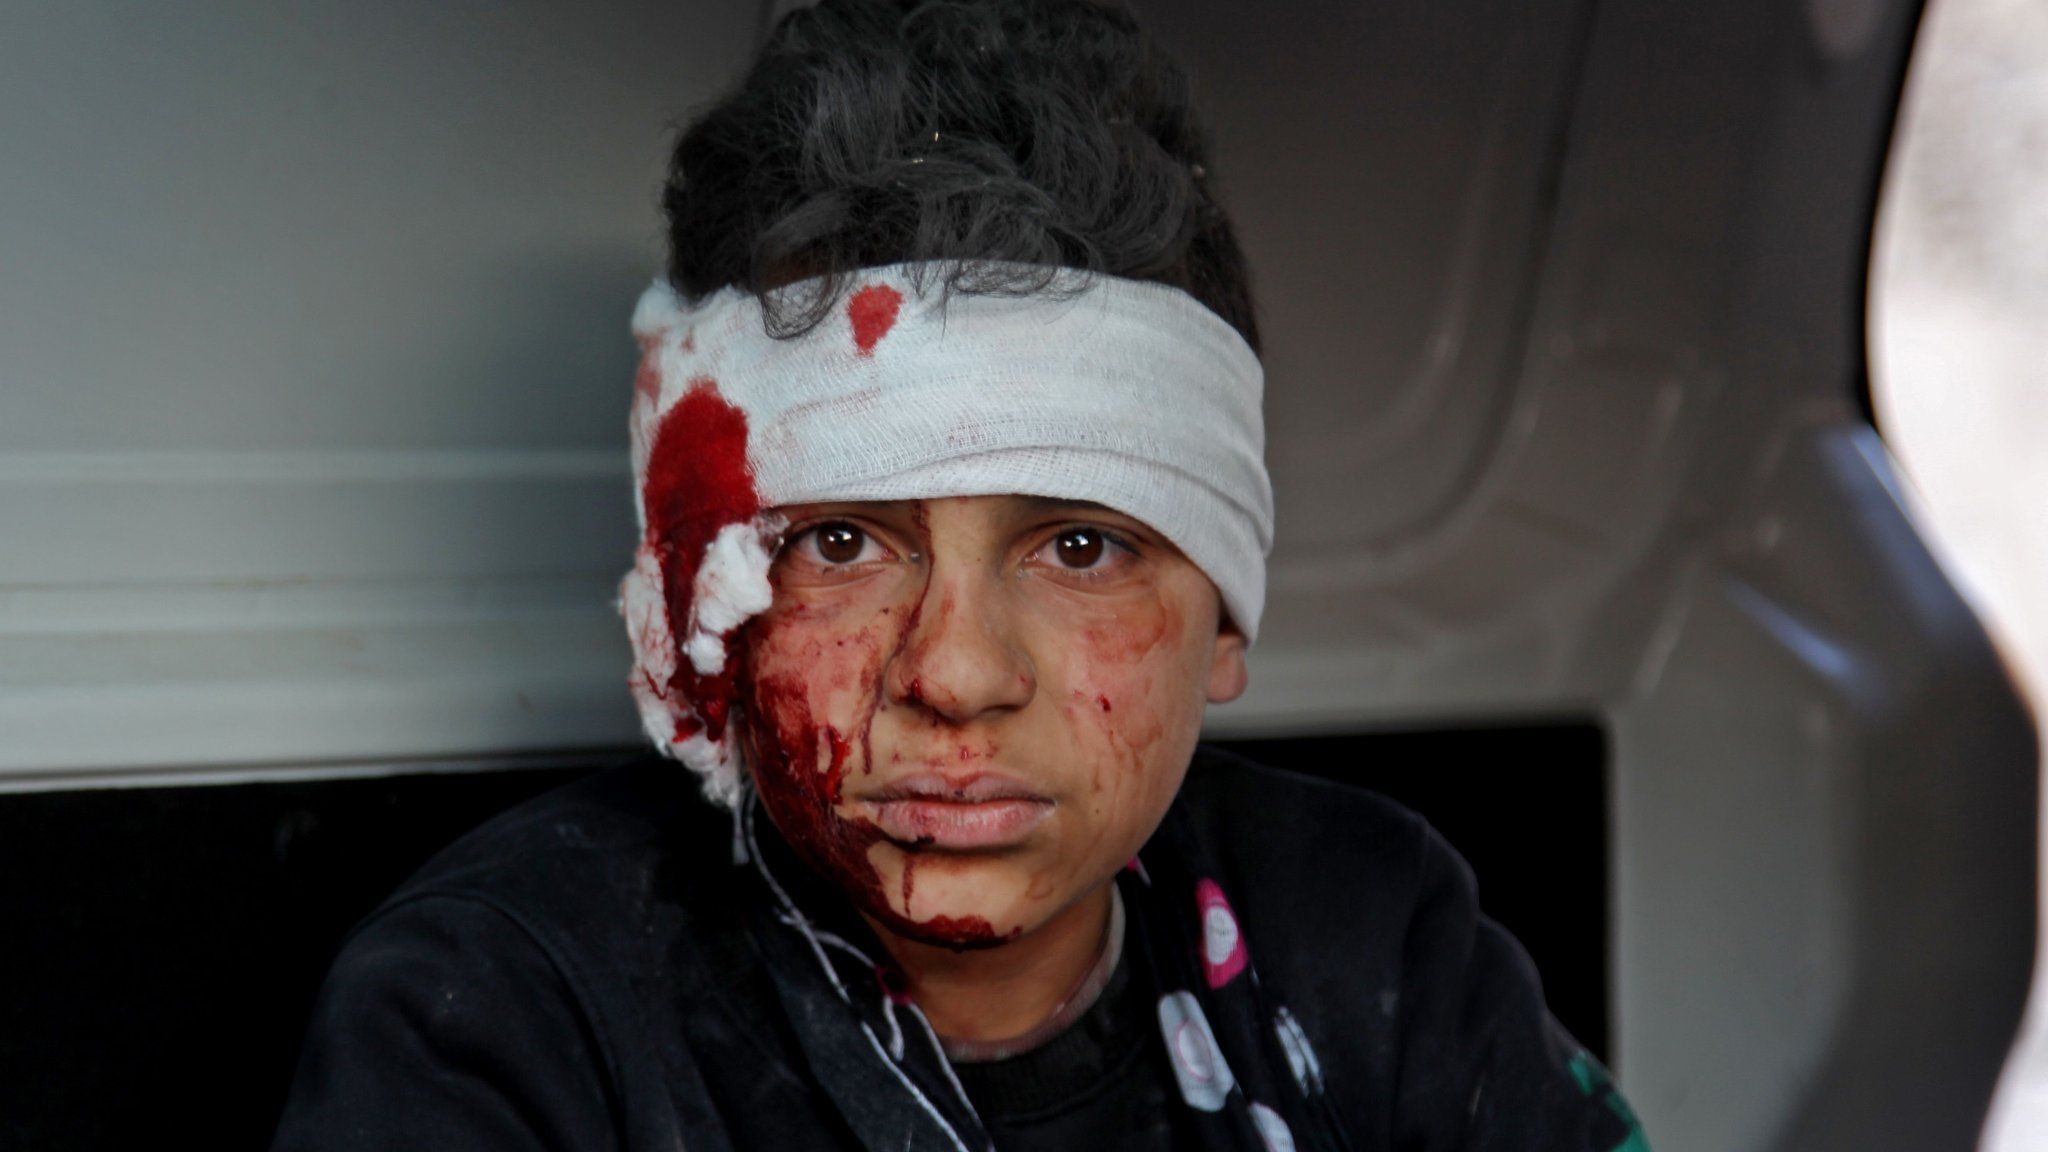 An injured Syrian boy sits inside a vehicle after a reported government air strike in Maarat Misrin, north-western Syria, on 25 February 2020